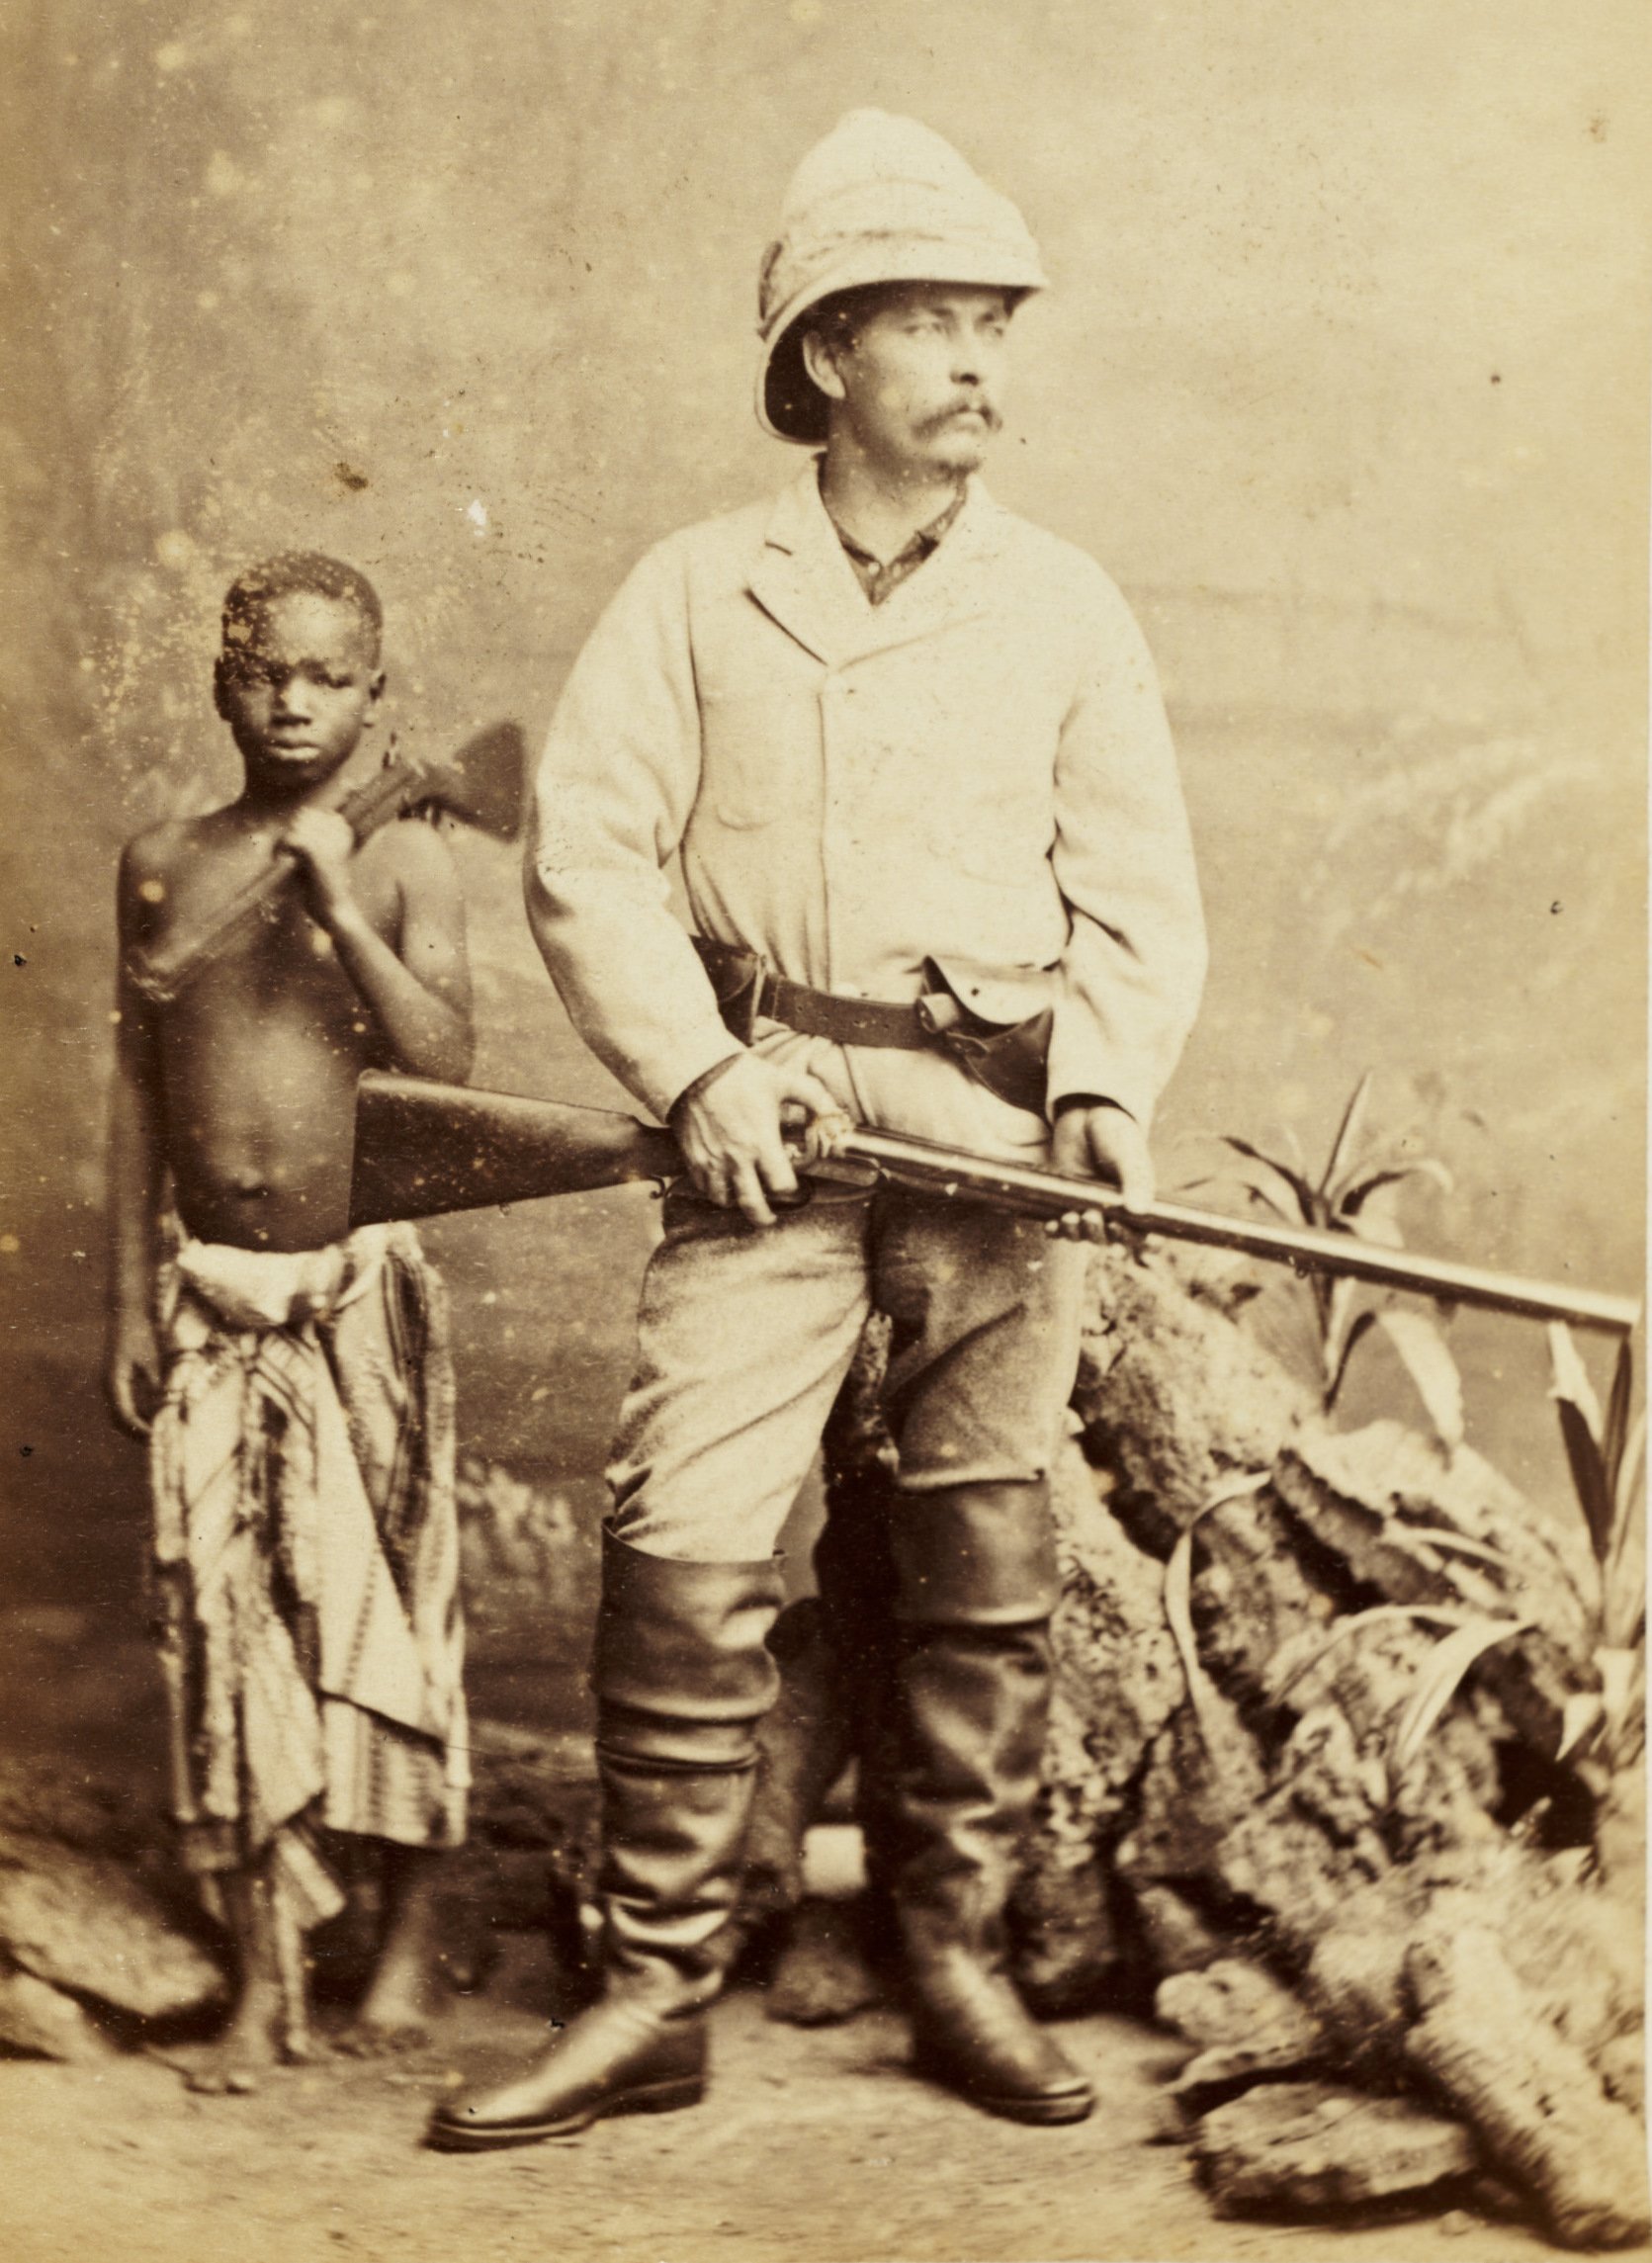 DAVID LIVINGSTONE - The African TouchThe African Touch